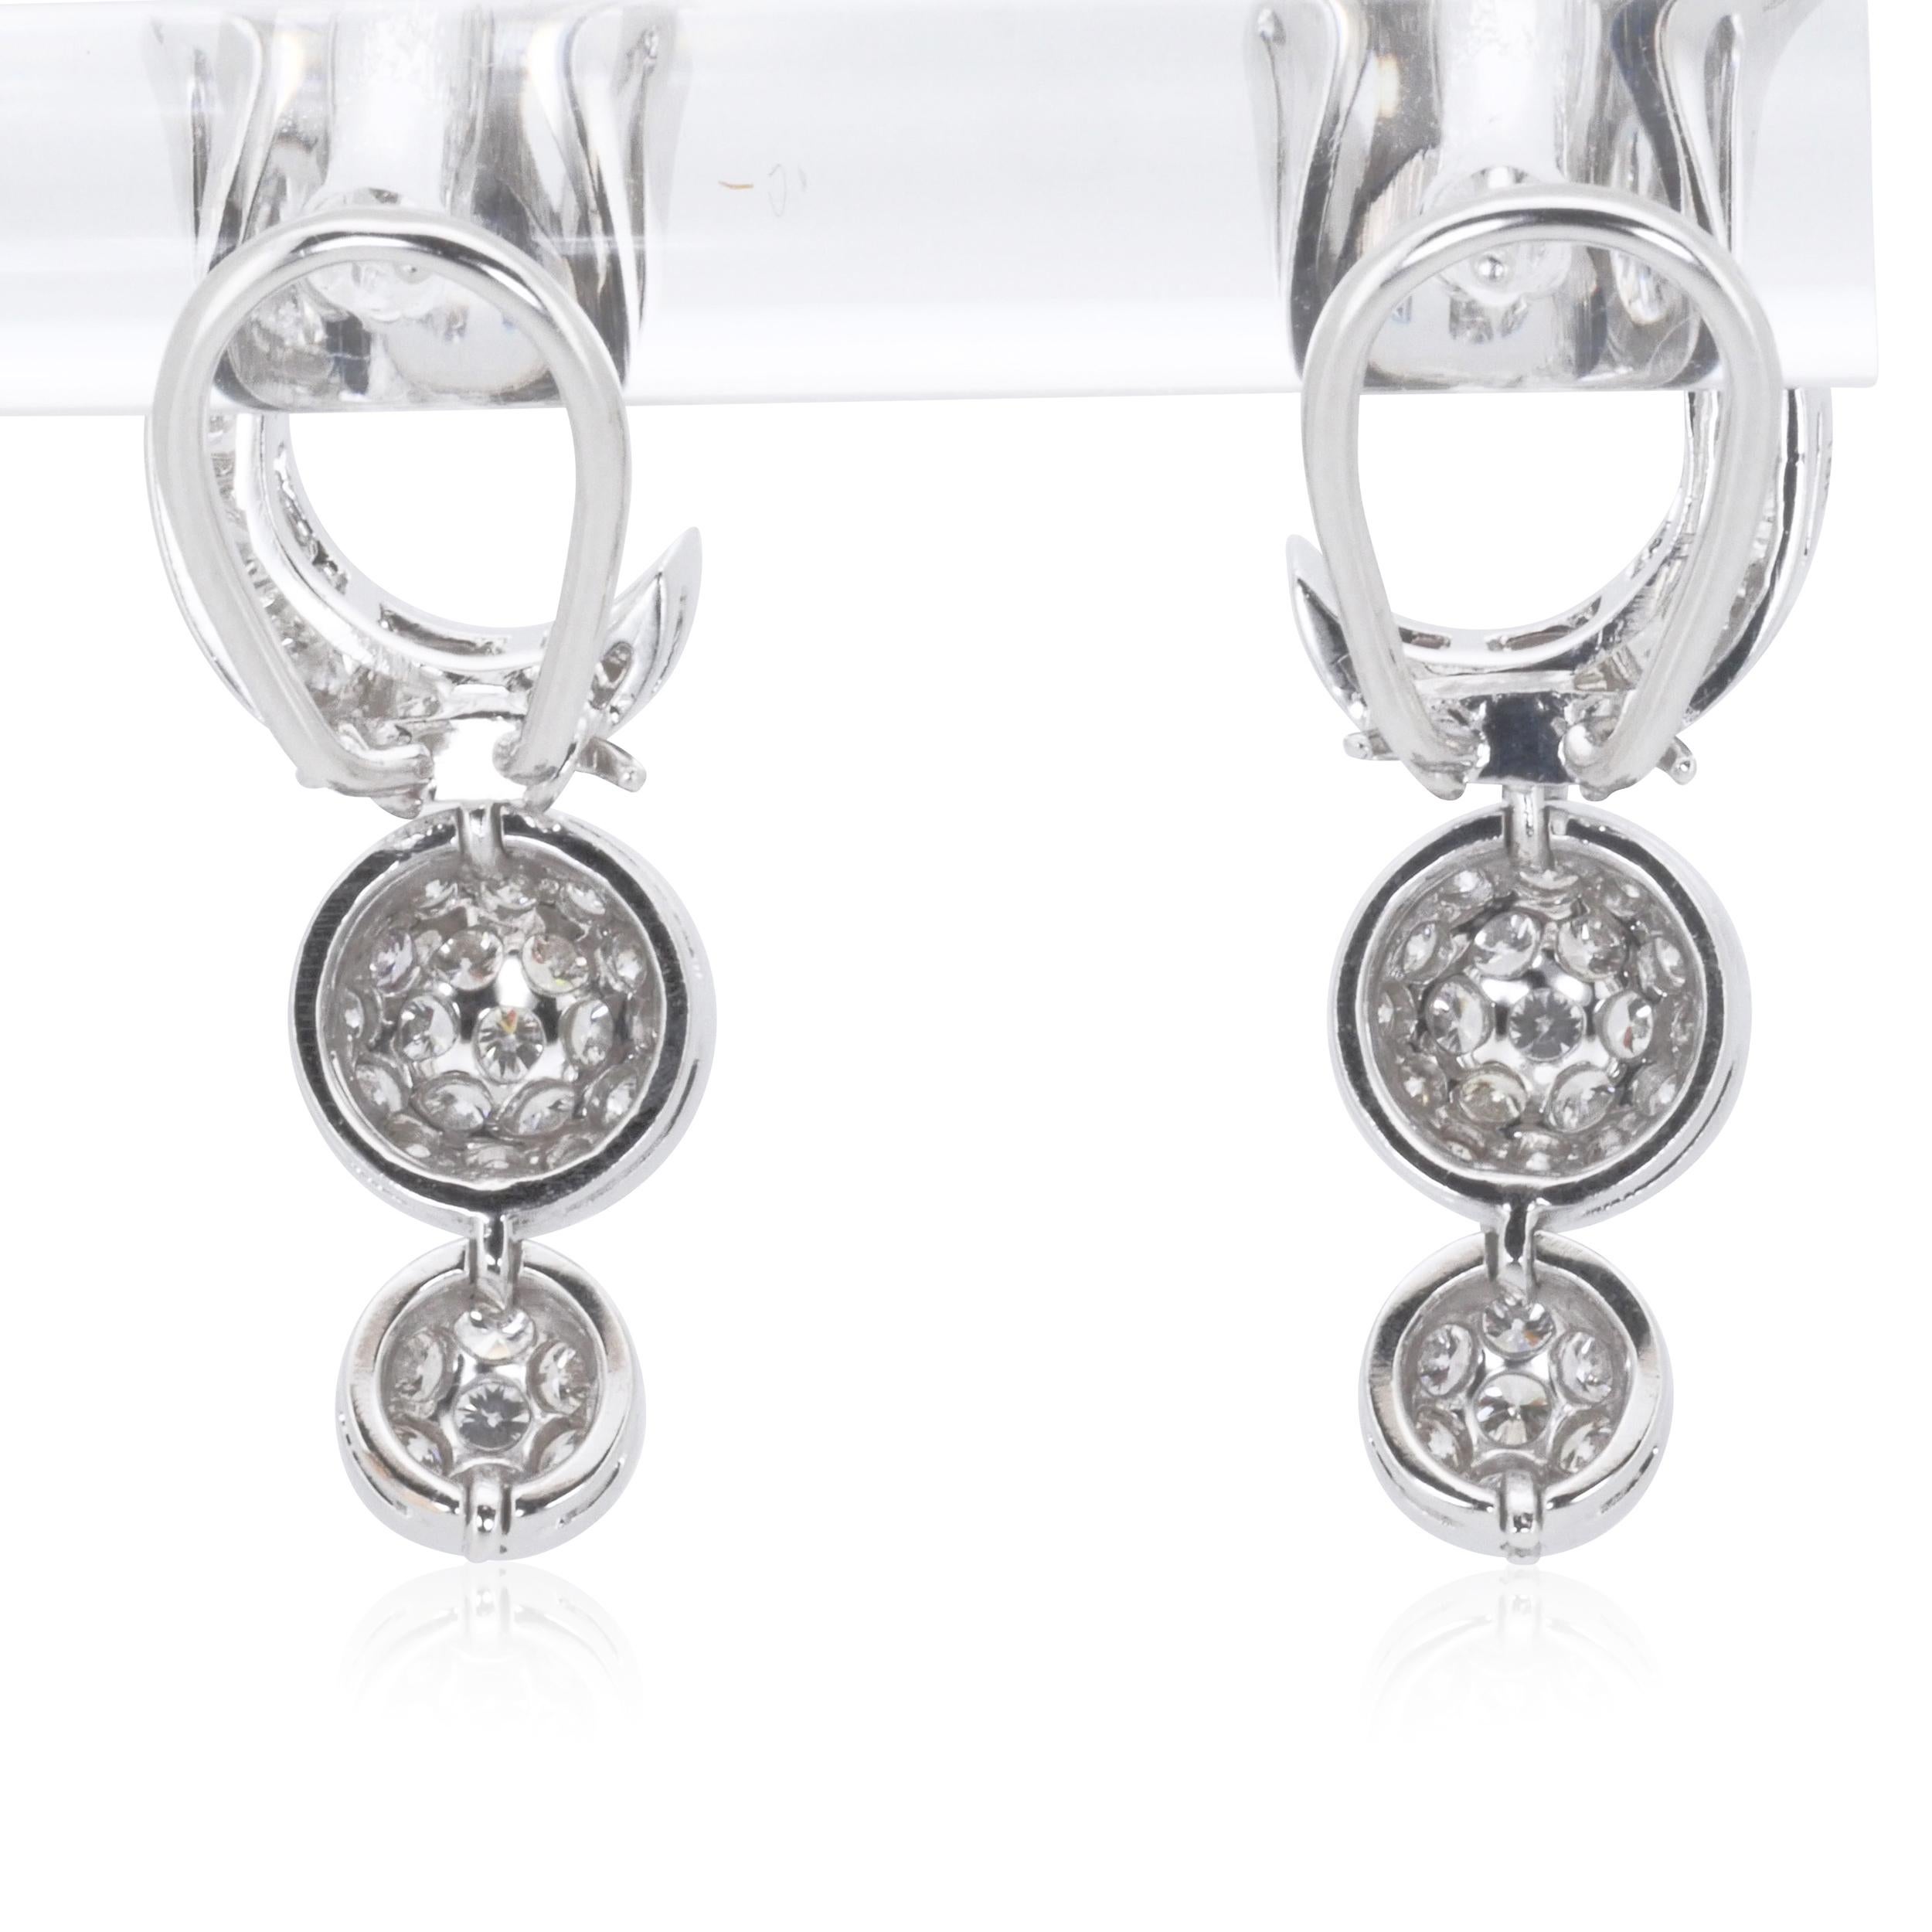 Sparkling 18k White Gold Dangle Earrings with 2.4 carat Natural Diamond 1